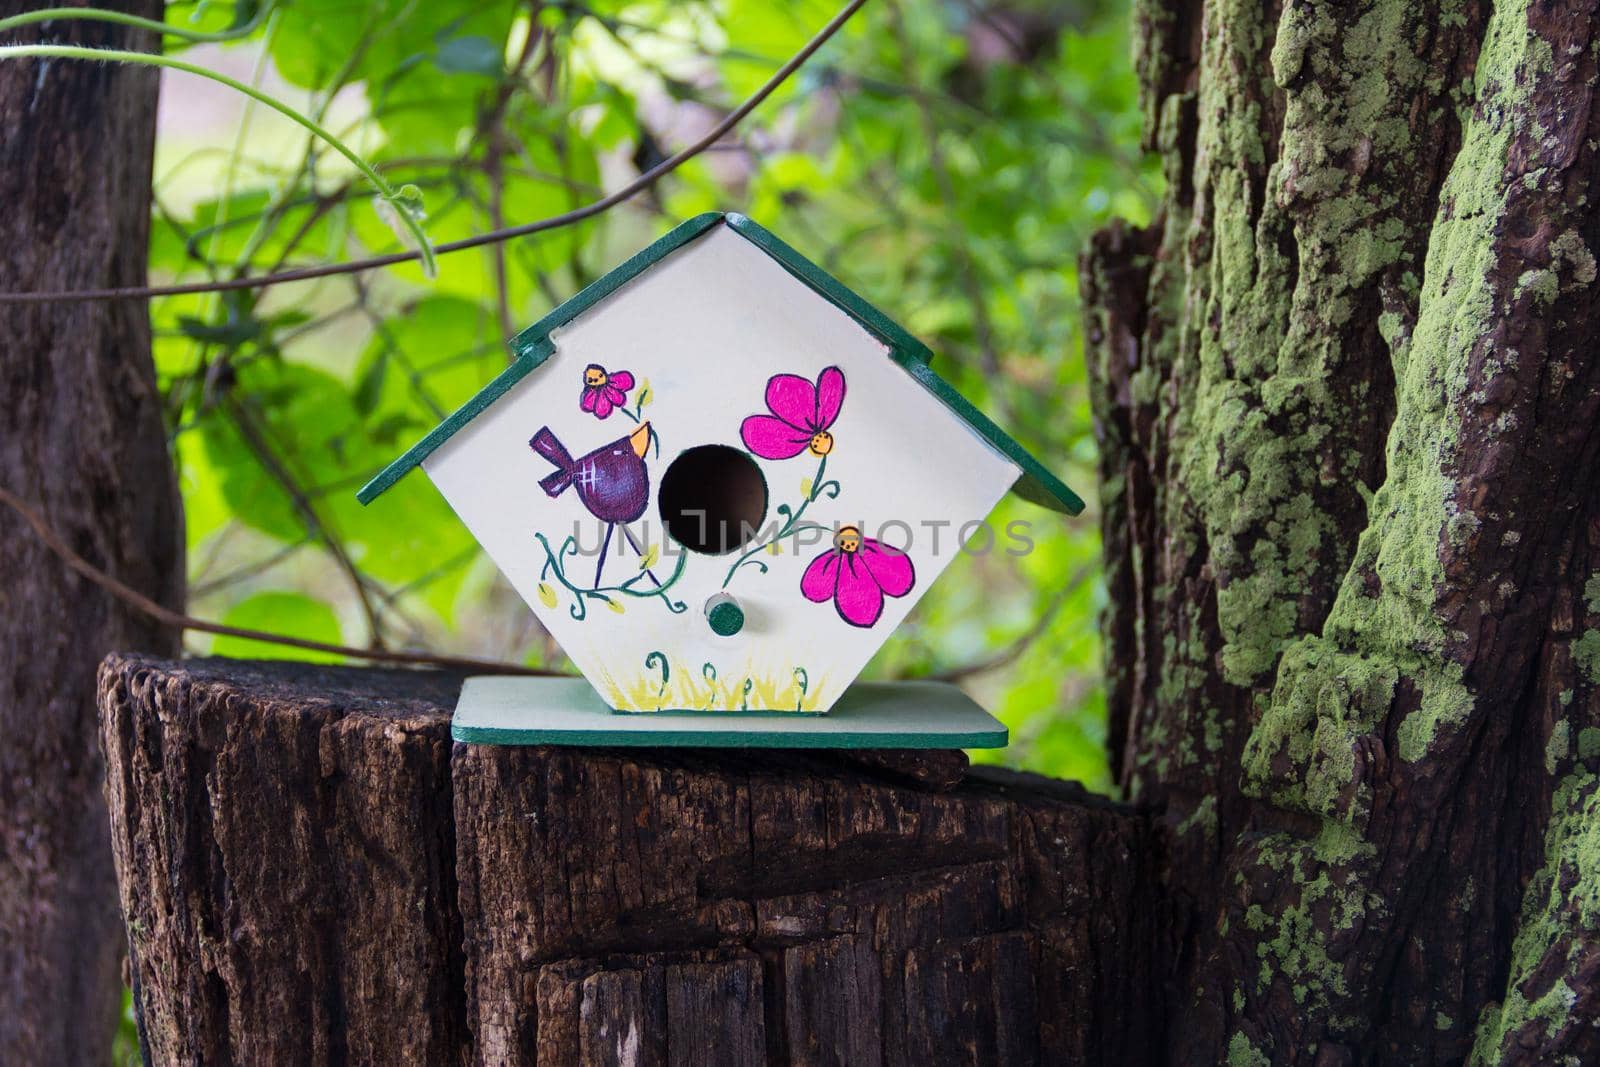 handmade houses for birds hand painted on the tree trunk in spring by GabrielaBertolini